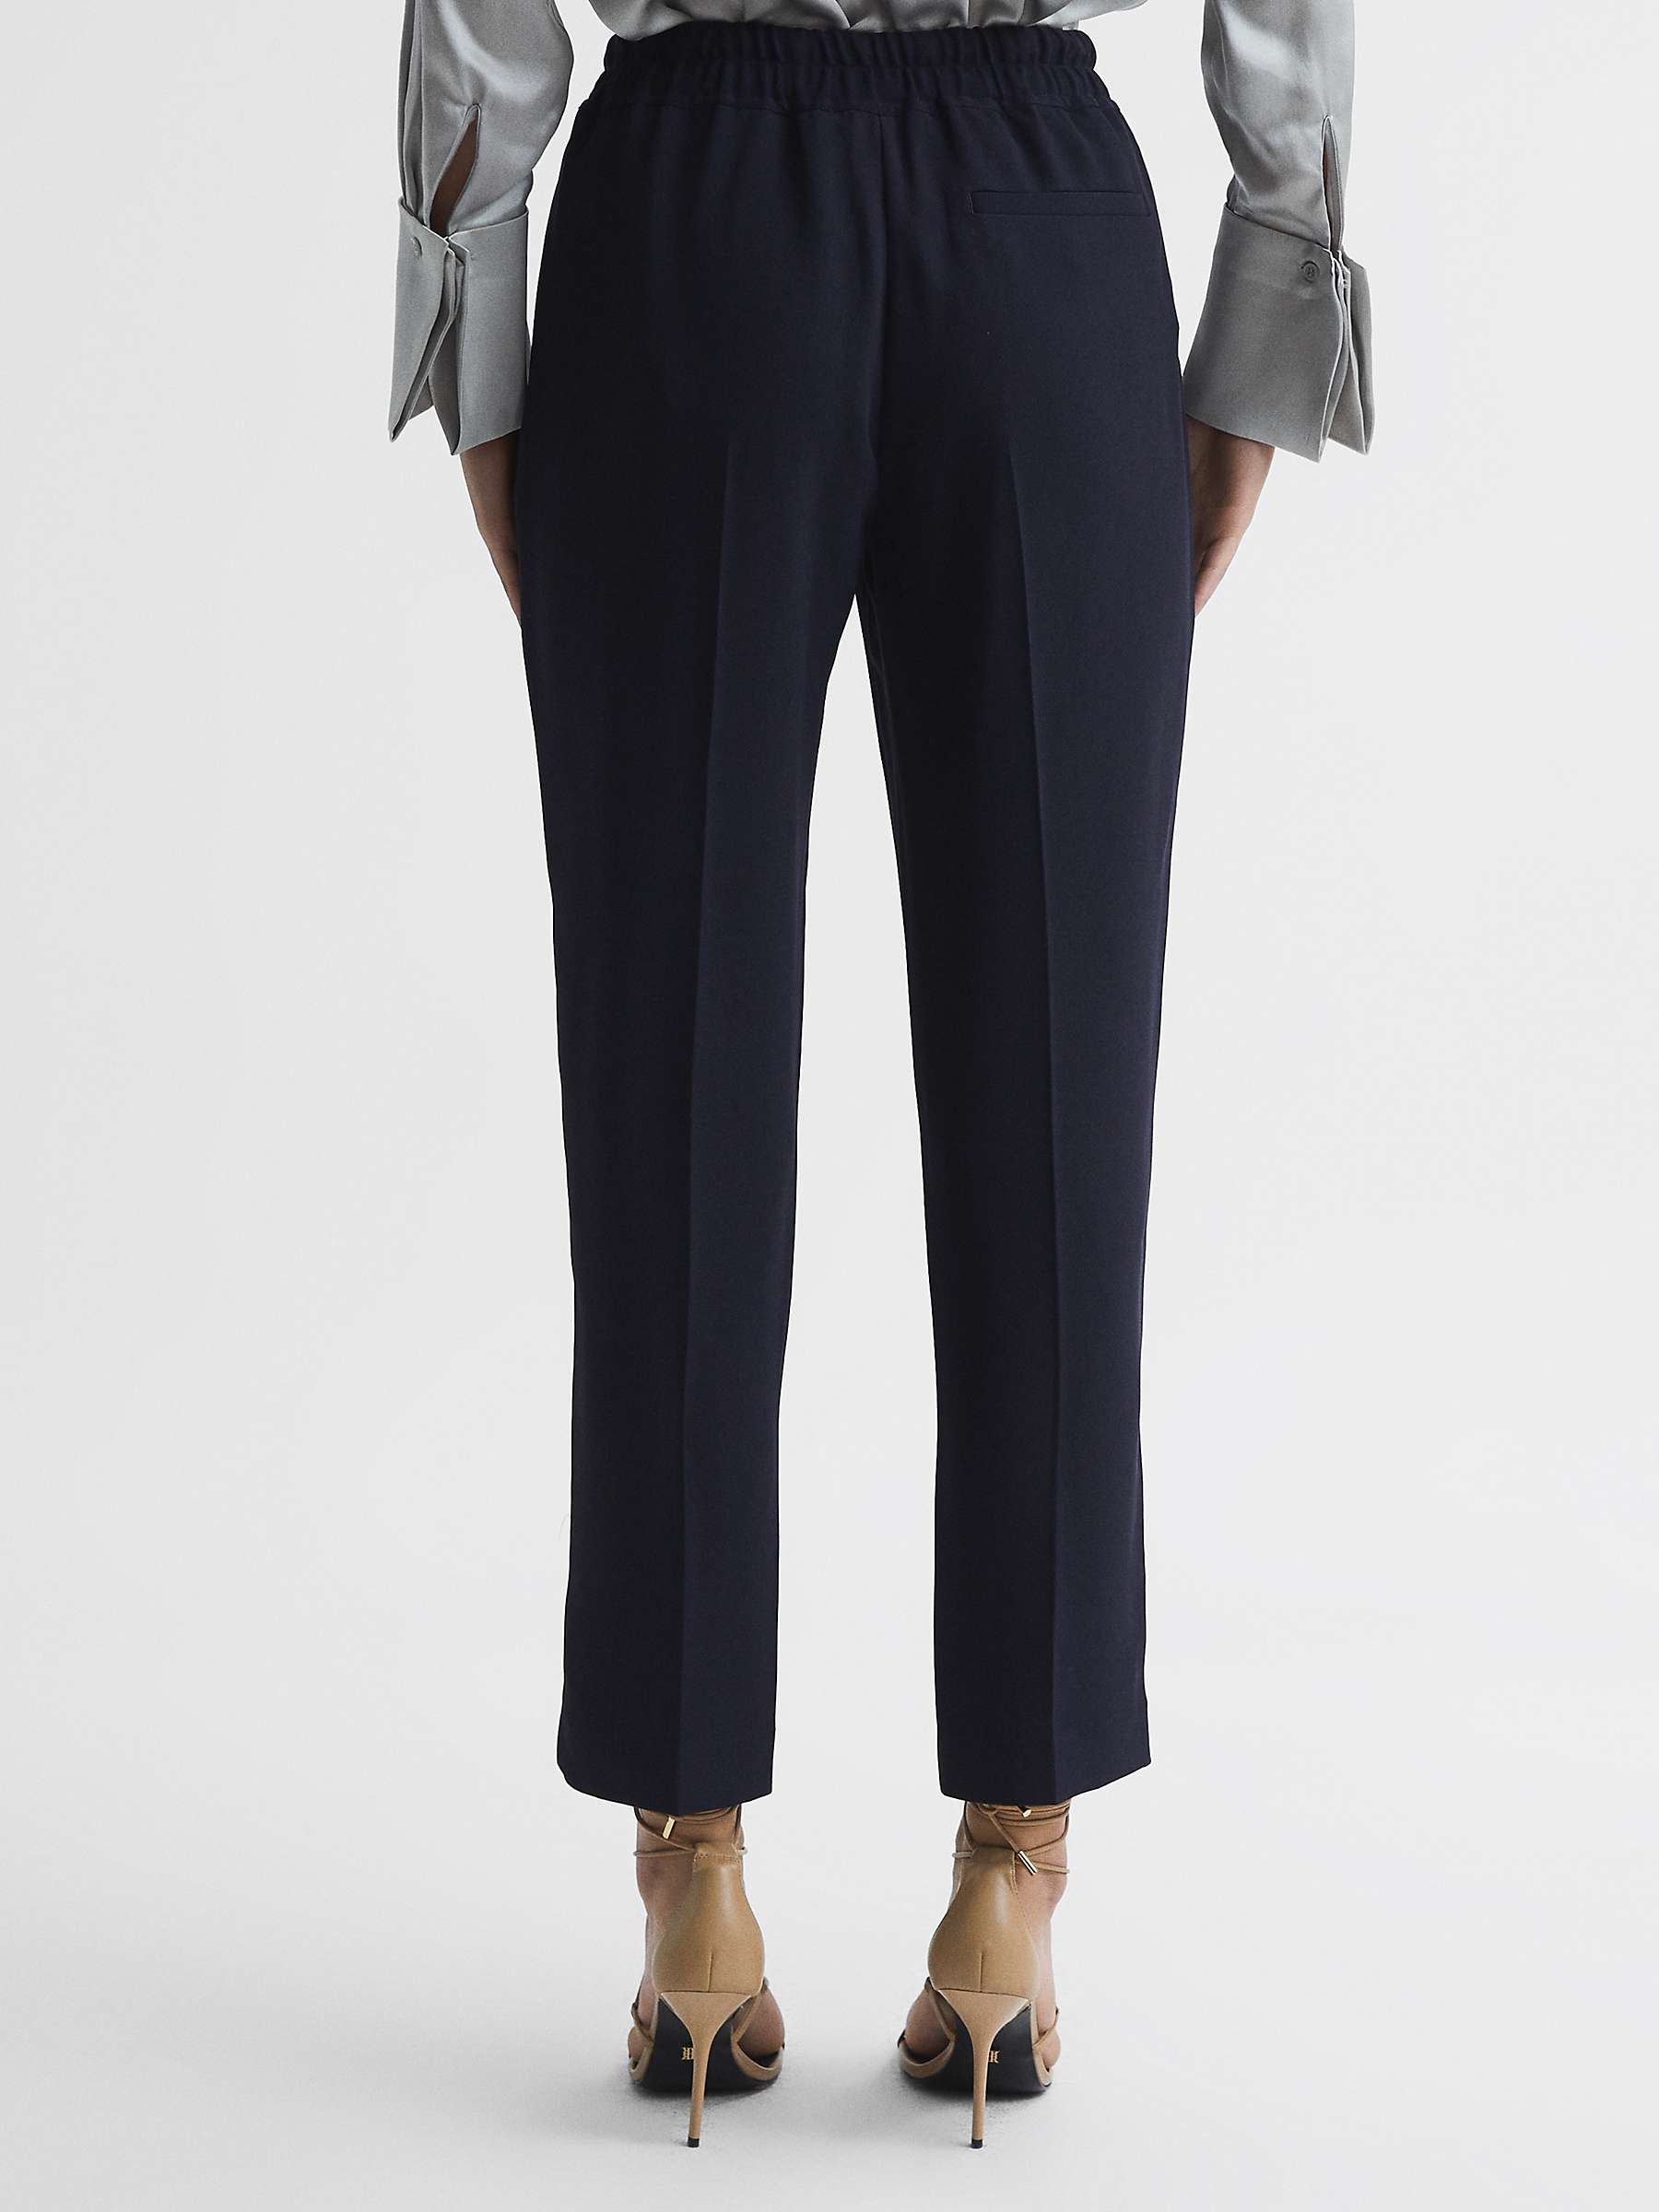 Buy Reiss Hailey Ankle Grazer Trousers, Navy Online at johnlewis.com